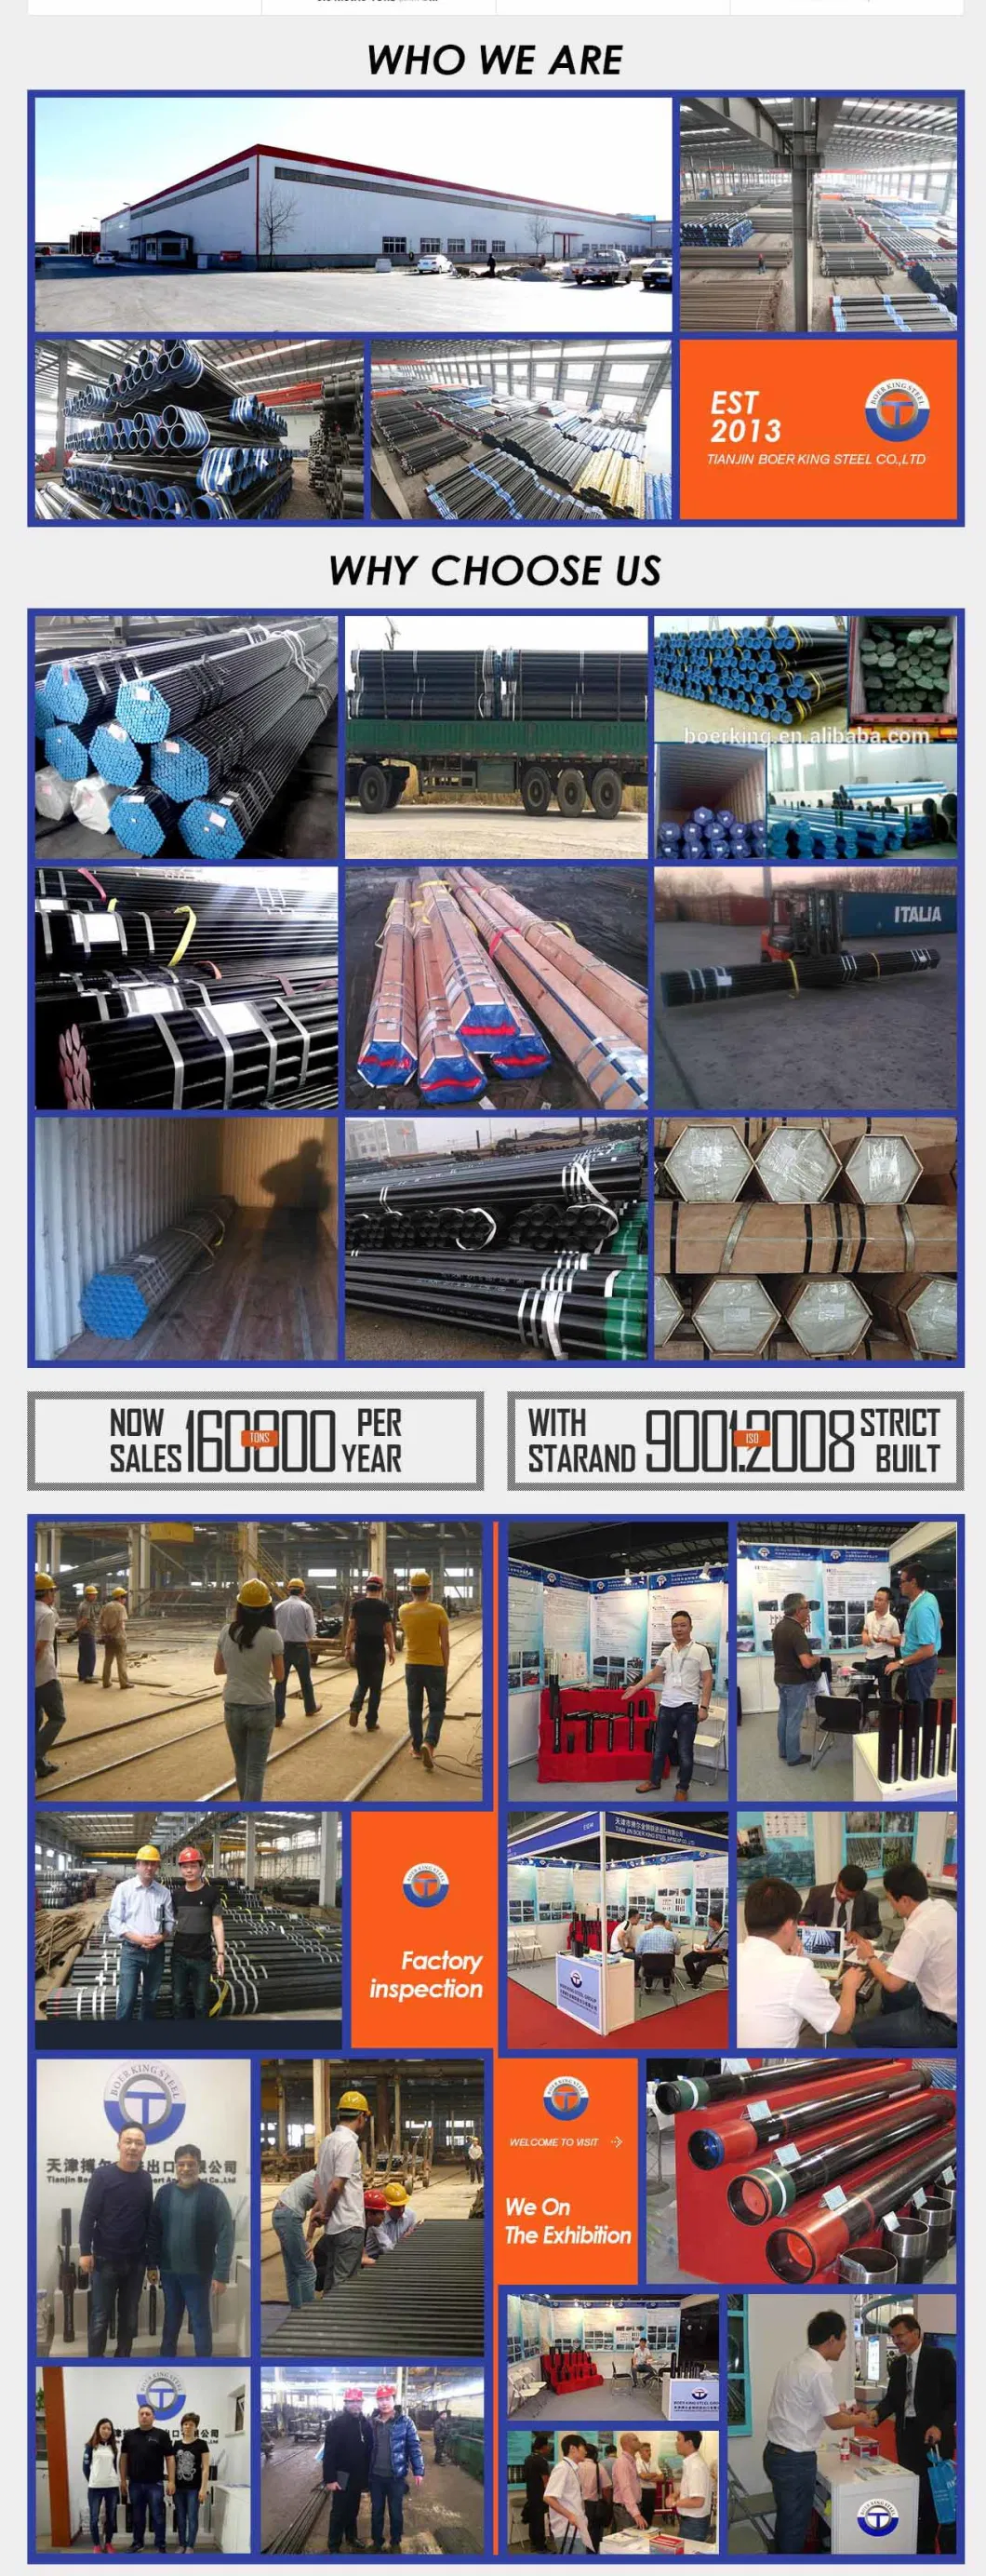 DIN17175 X42 X50 X60 ASME SA213 Carbon Seamless Steel Pipe ASTM A106 20crmo Alloy Seamless Steel Tube for Steel Structure